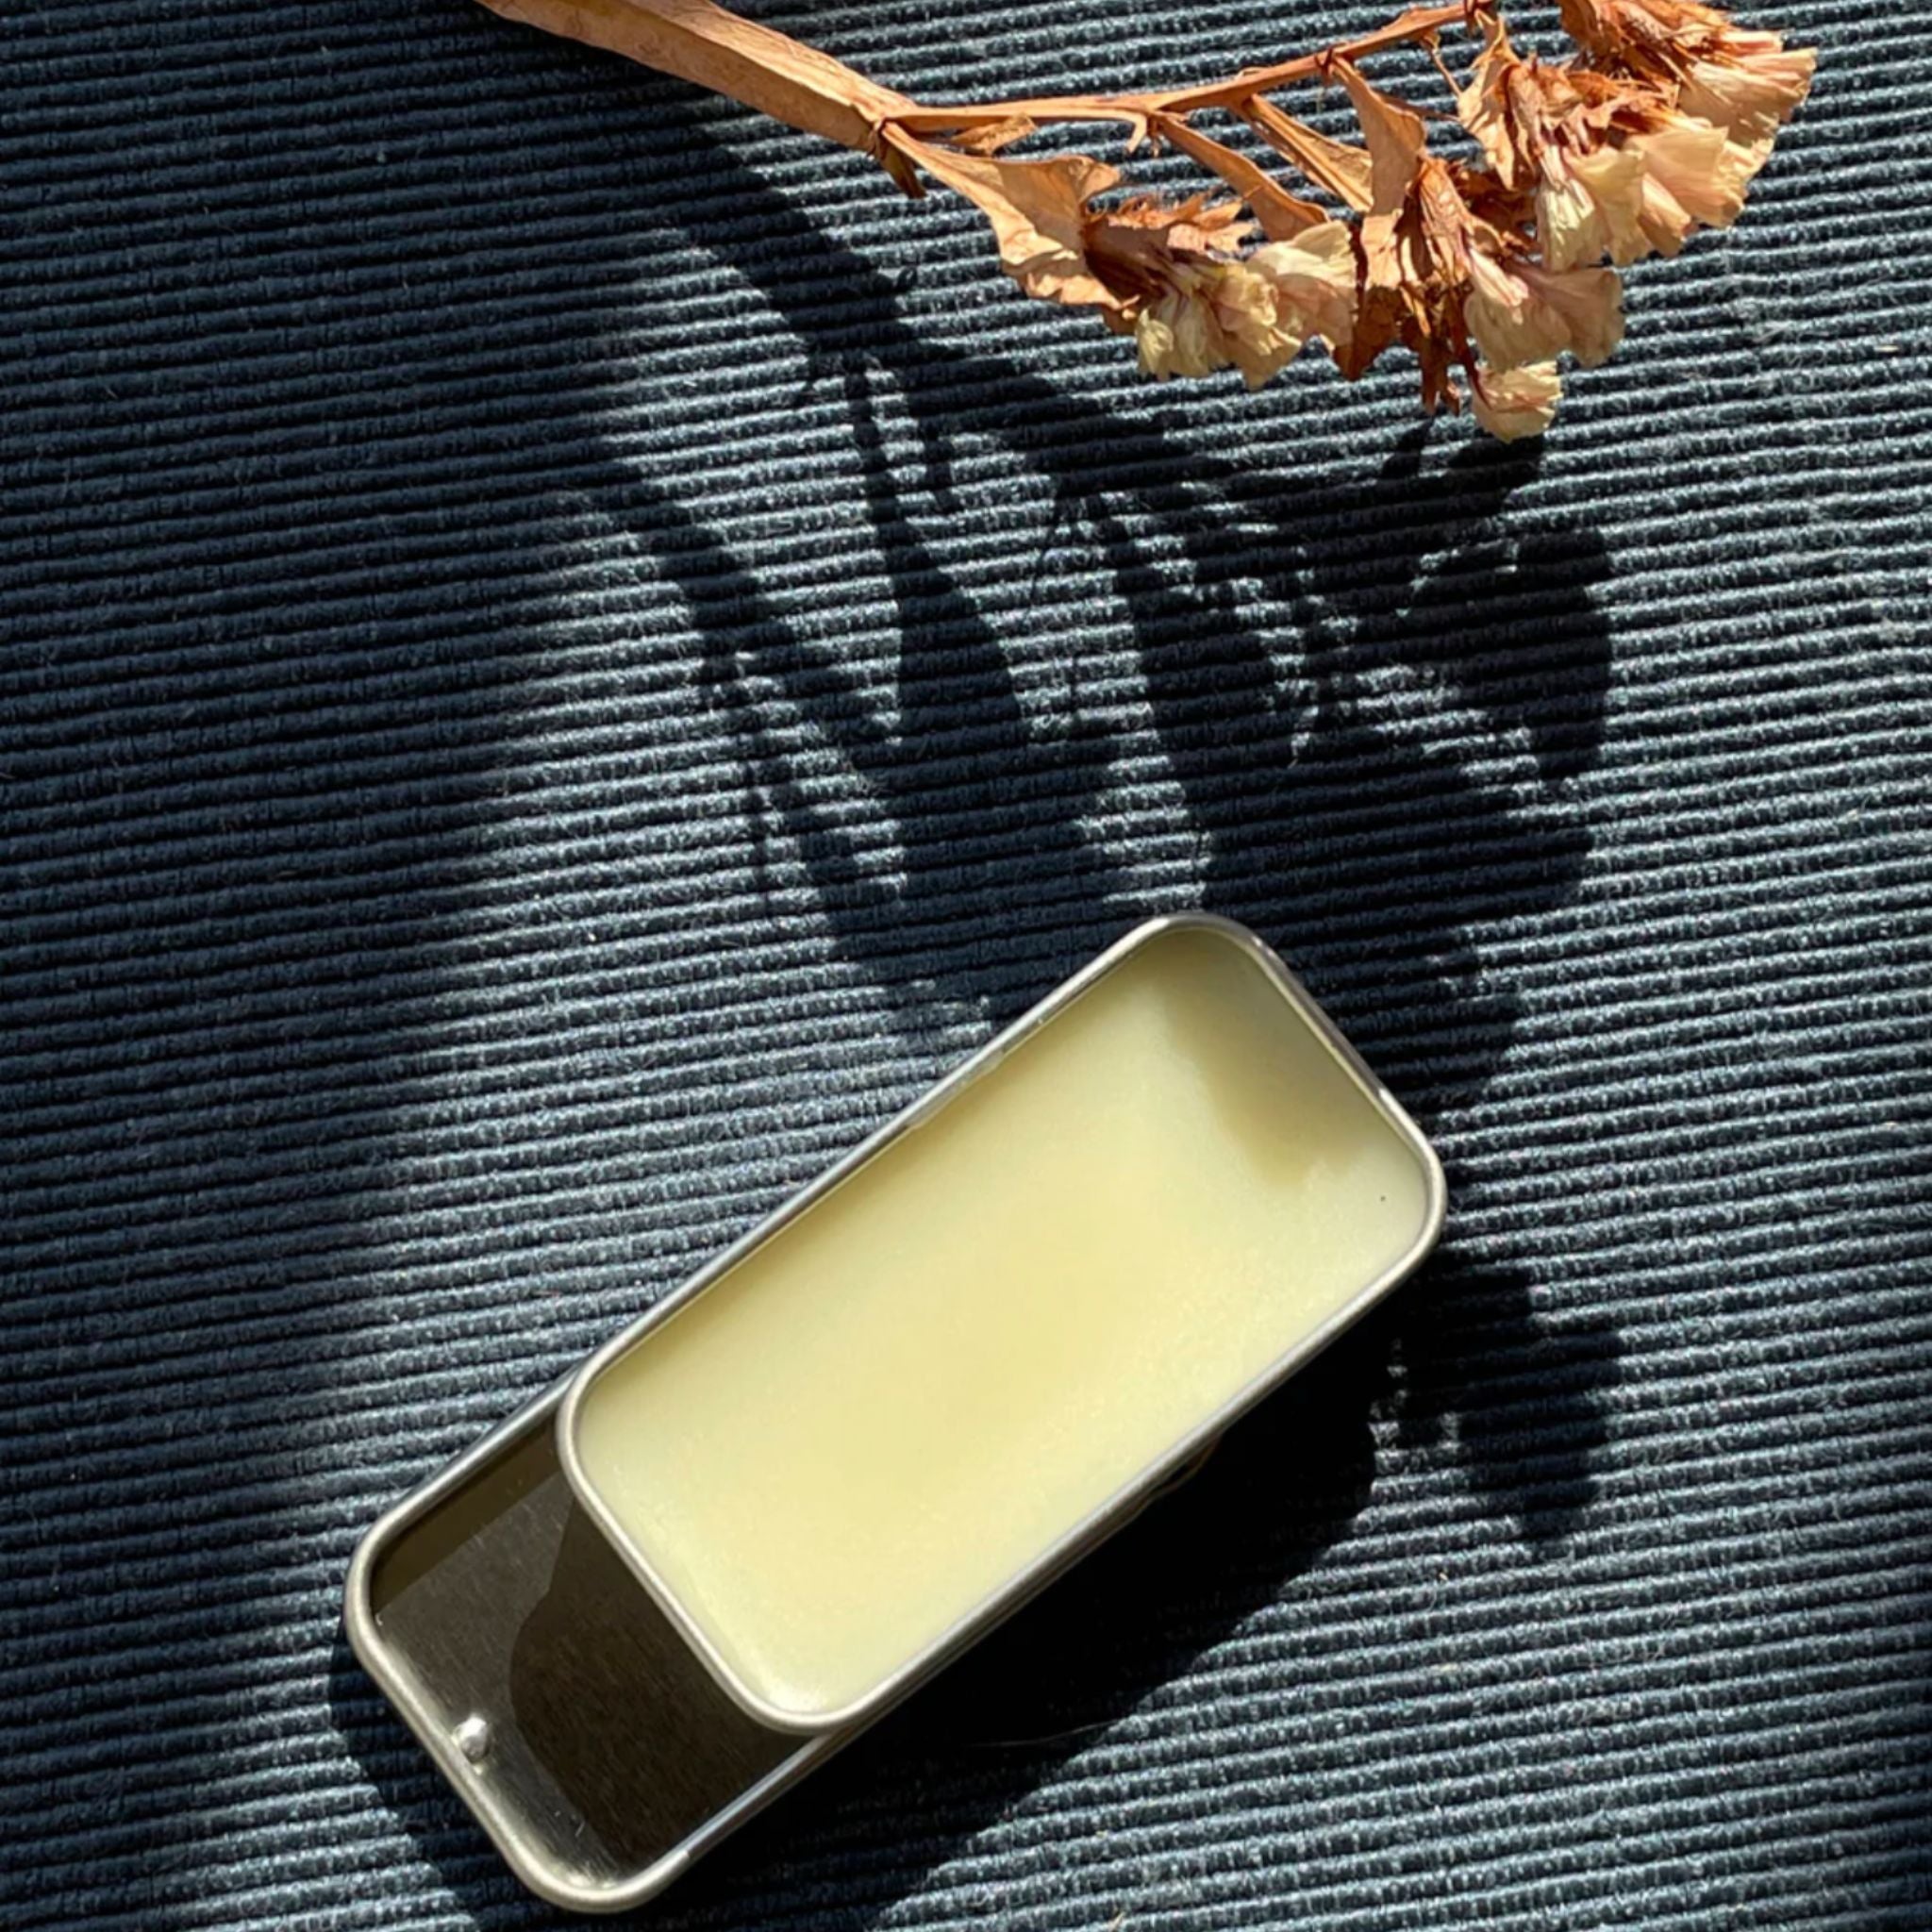 a small container of balm next to a dried flower